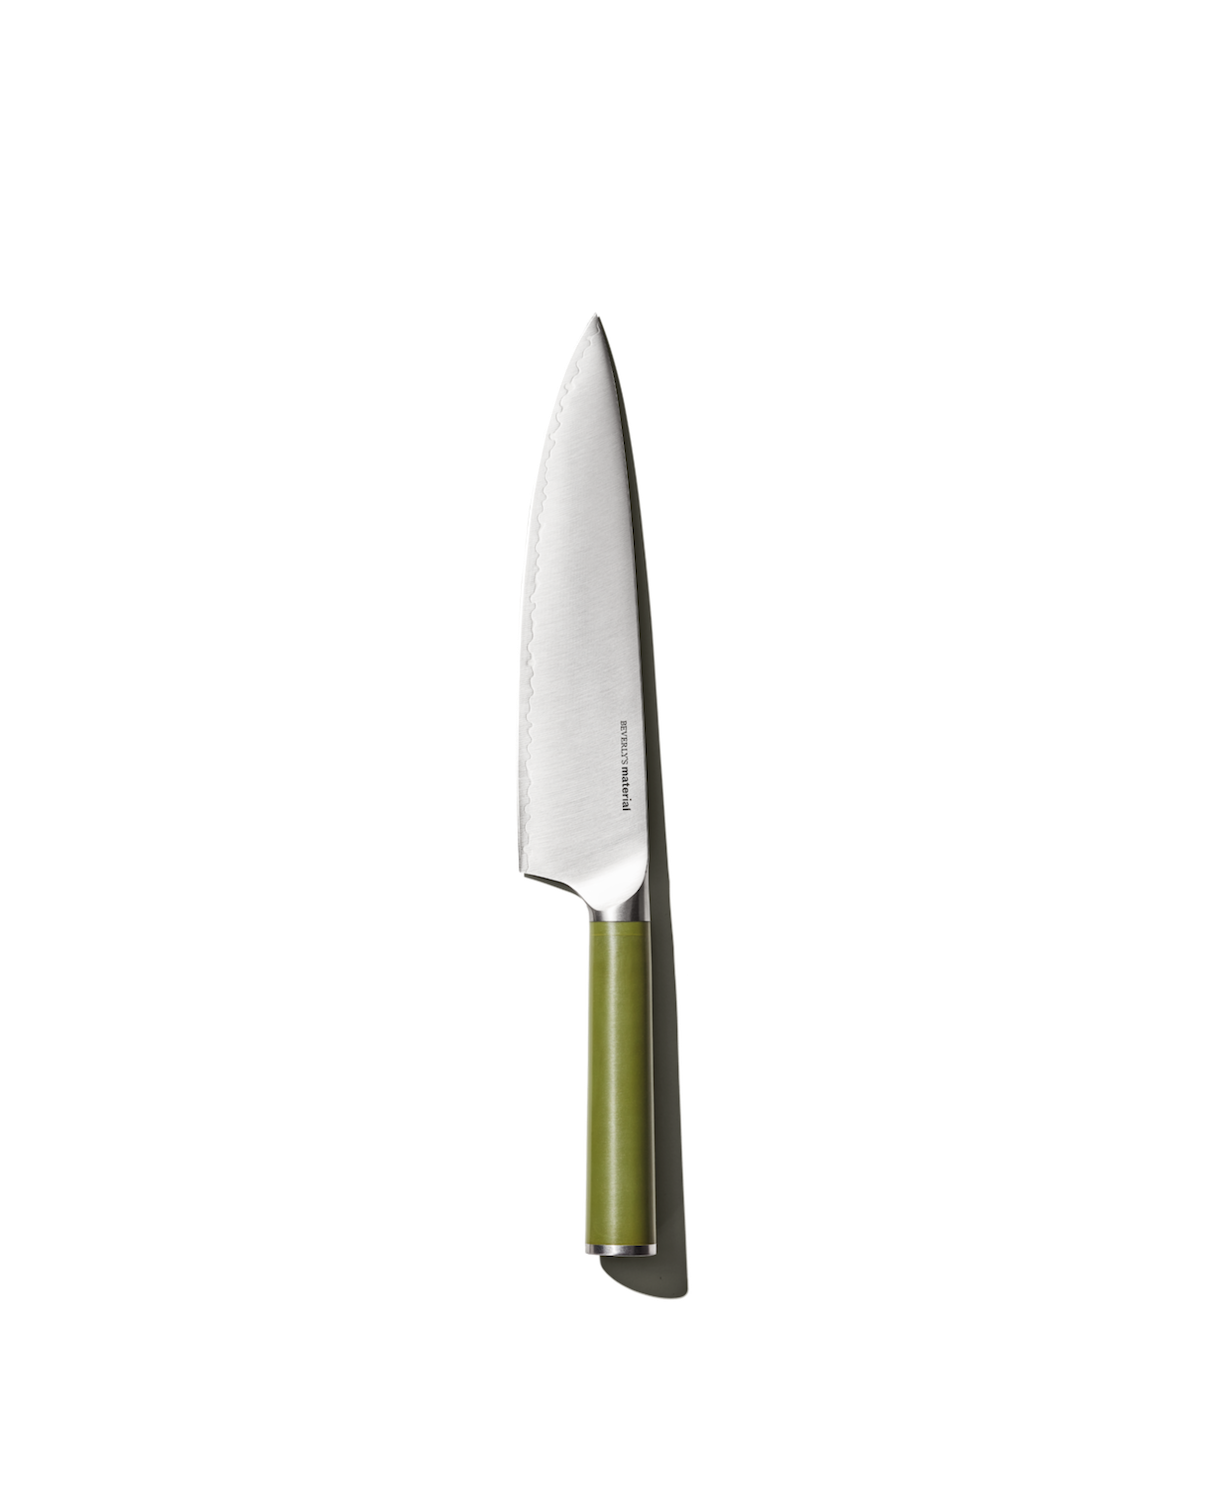 Material | The 8 Knife | Japanese Stainless Steel Knife | 8 inch Chef's Knife in Green | Kitchen Tools